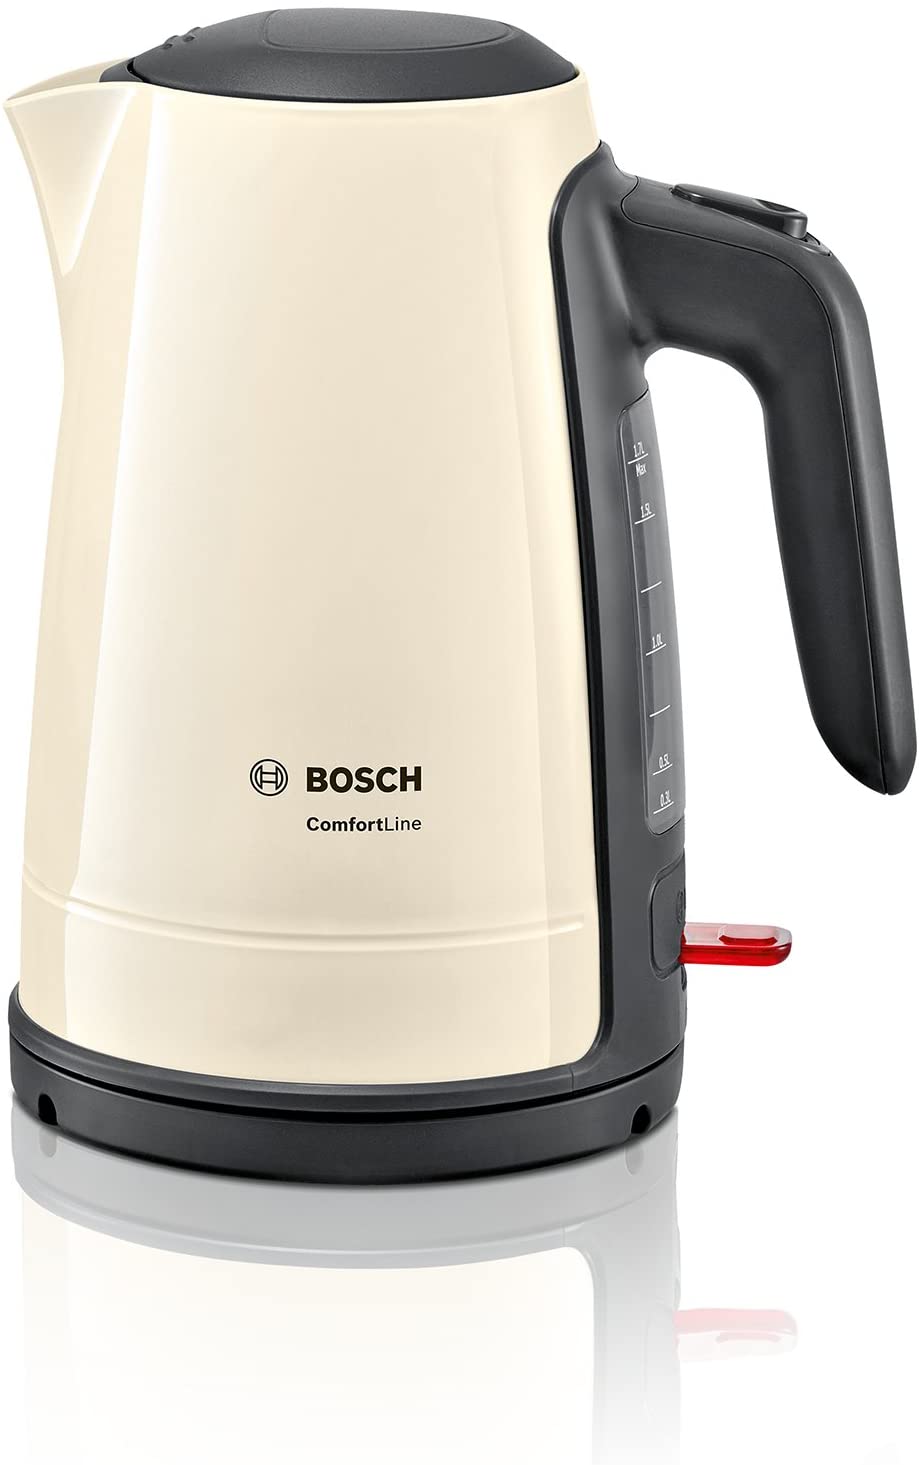 Bosch ComfortLine TWK6A017 Wireless Kettle, 1-Cup Function, Large Opening, Overheating Protection, Removable Limescale Filter, 1.7 L, 2400 W, Cream